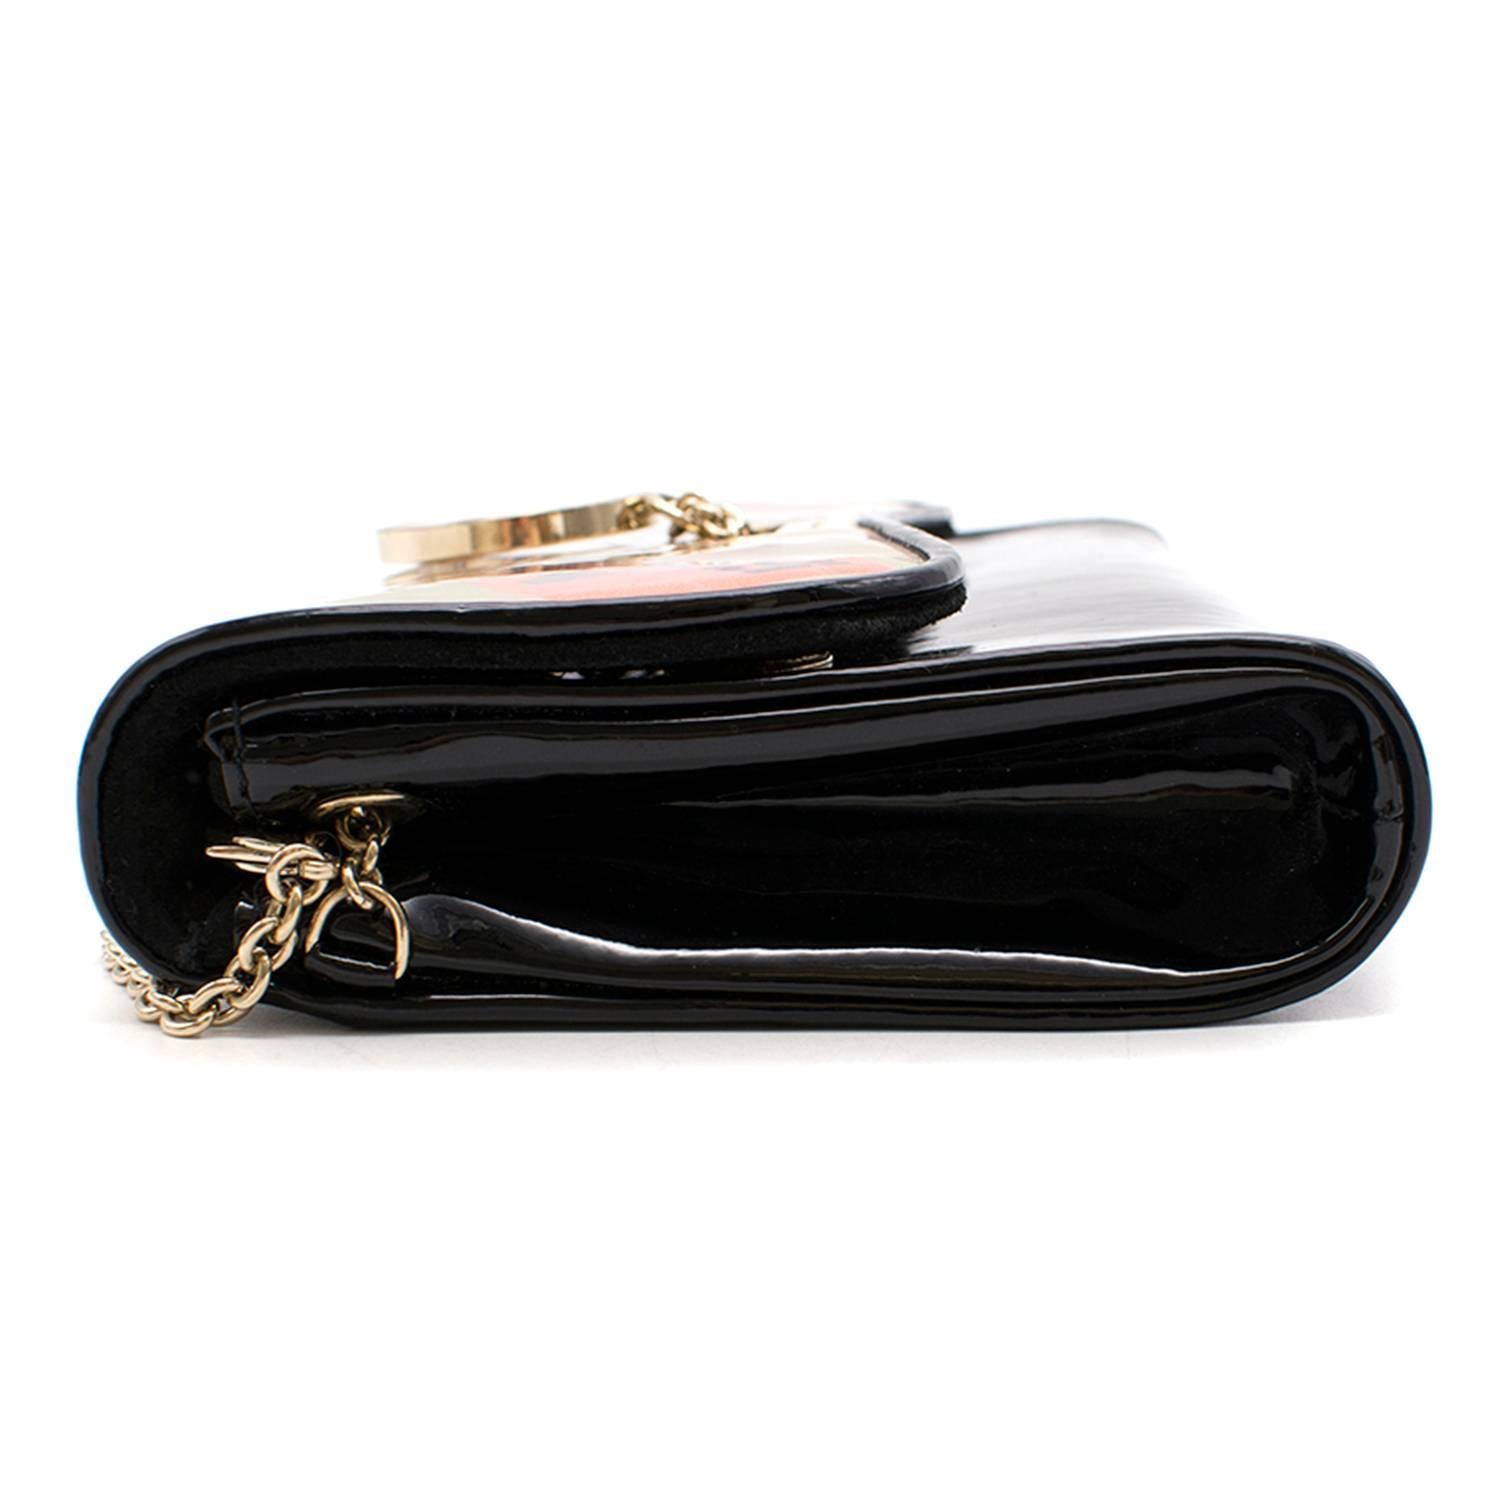 Women's  Christian Louboutin Trash Patent Leather Bag For Sale